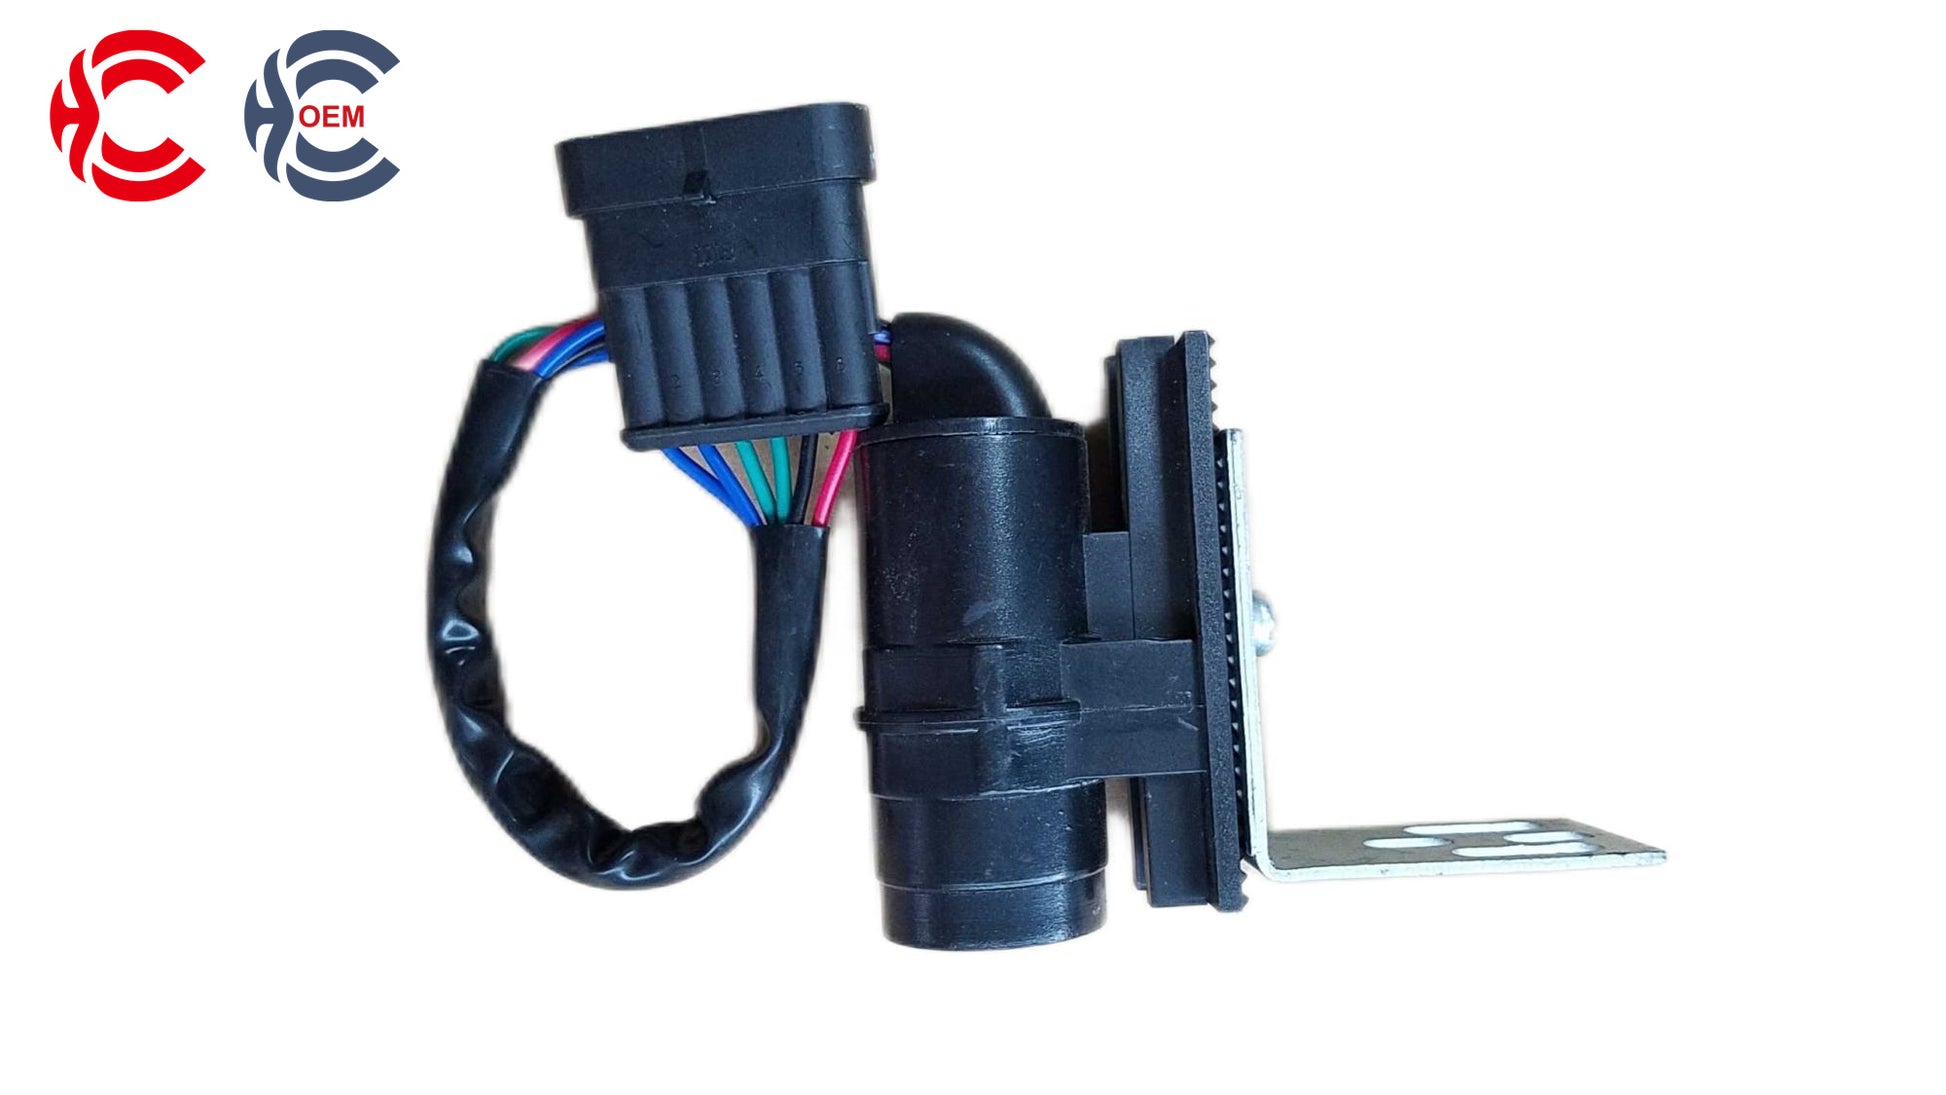 OEM: DK206-SMaterial: ABS MetalColor: Black SilverOrigin: Made in ChinaWeight: 100gPacking List: 1* Rear Door Proximity Switch More ServiceWe can provide OEM Manufacturing serviceWe can Be your one-step solution for Auto PartsWe can provide technical scheme for you Feel Free to Contact Us, We will get back to you as soon as possible.